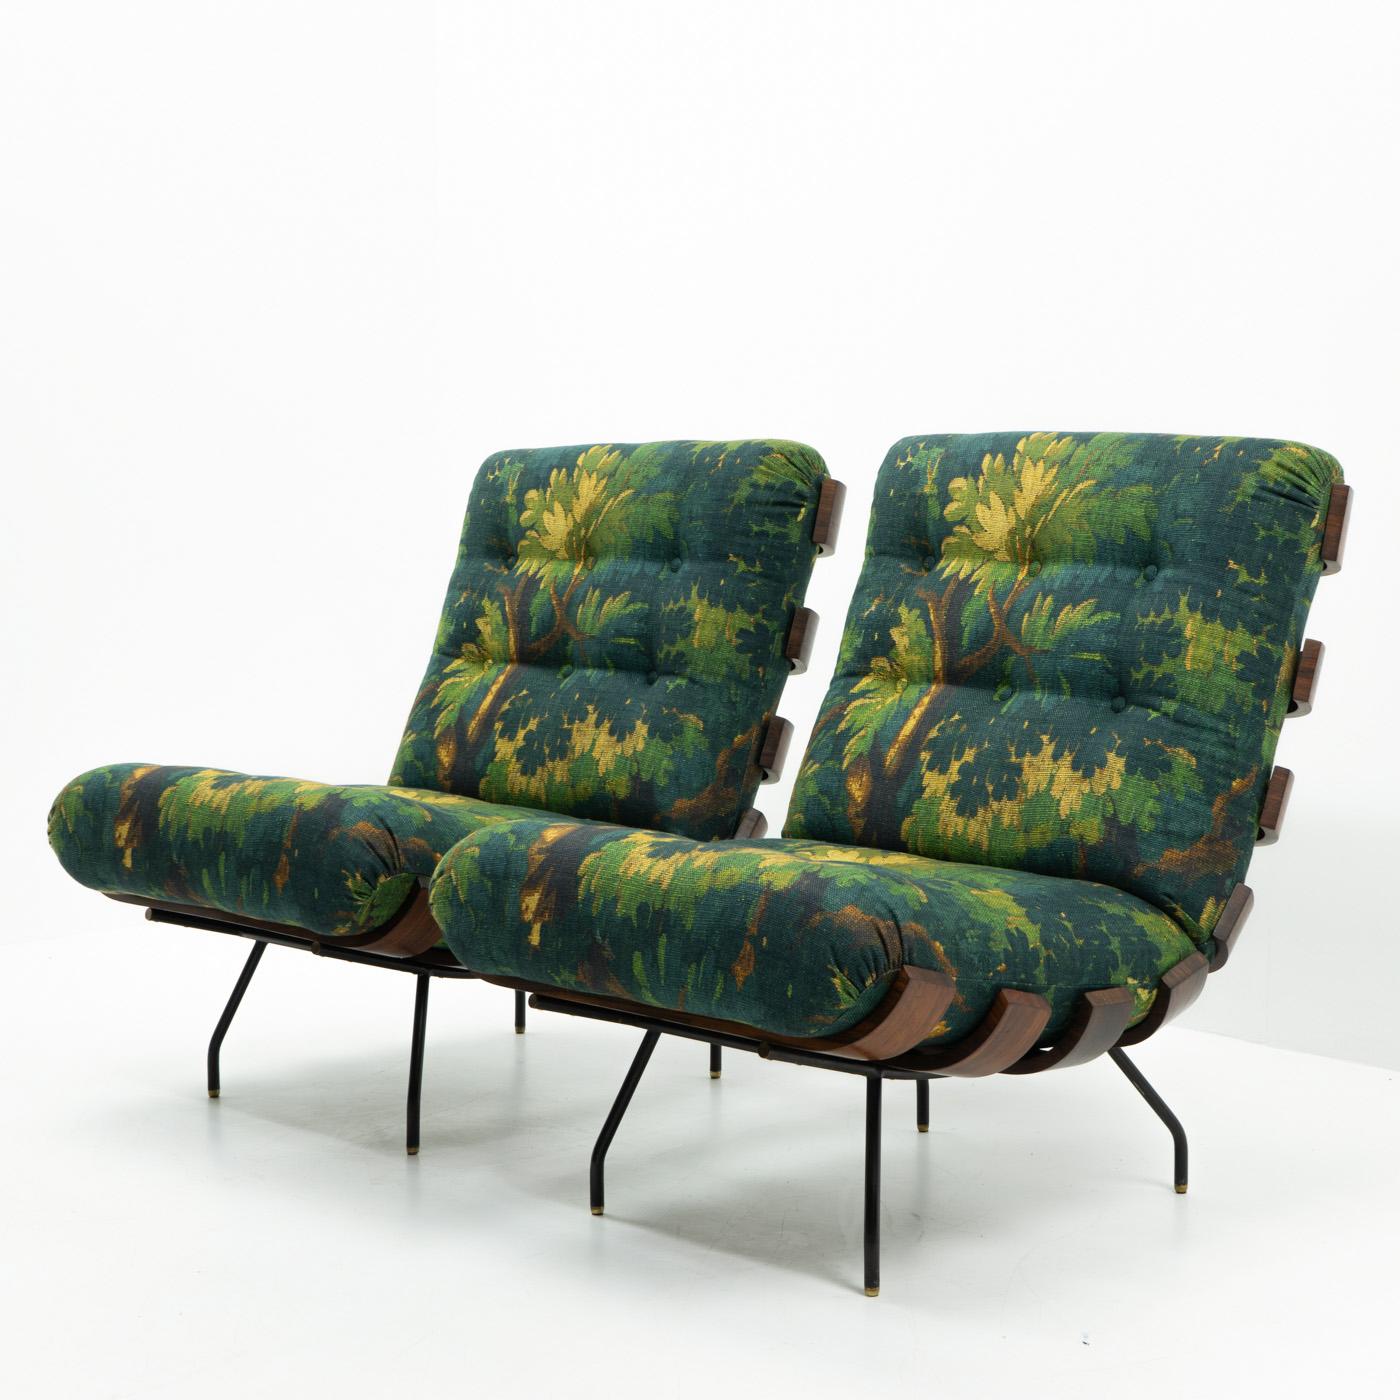 Mid-20th Century Brazilian Design Costela Lounge Chairs by Hauner & Eisler for Forma, 1950s For Sale